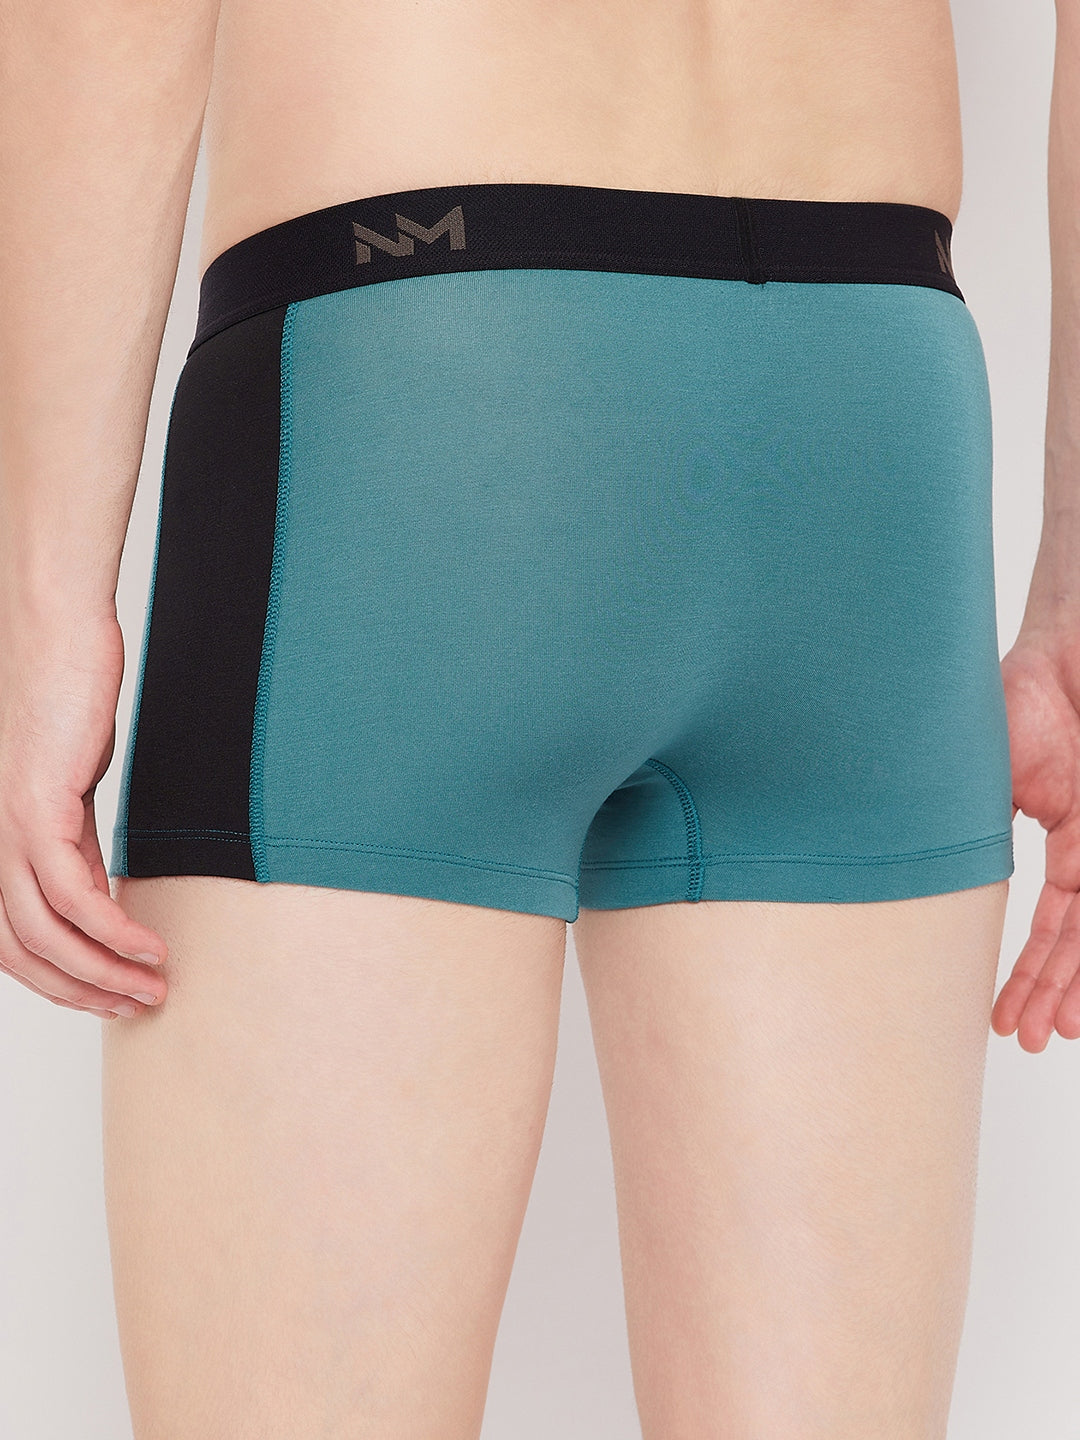 Neva Modal Solid Ultra Short Trunk Underwear for Men- Sea Green, Maroon, Silver Grey Collection (Pack of 3)